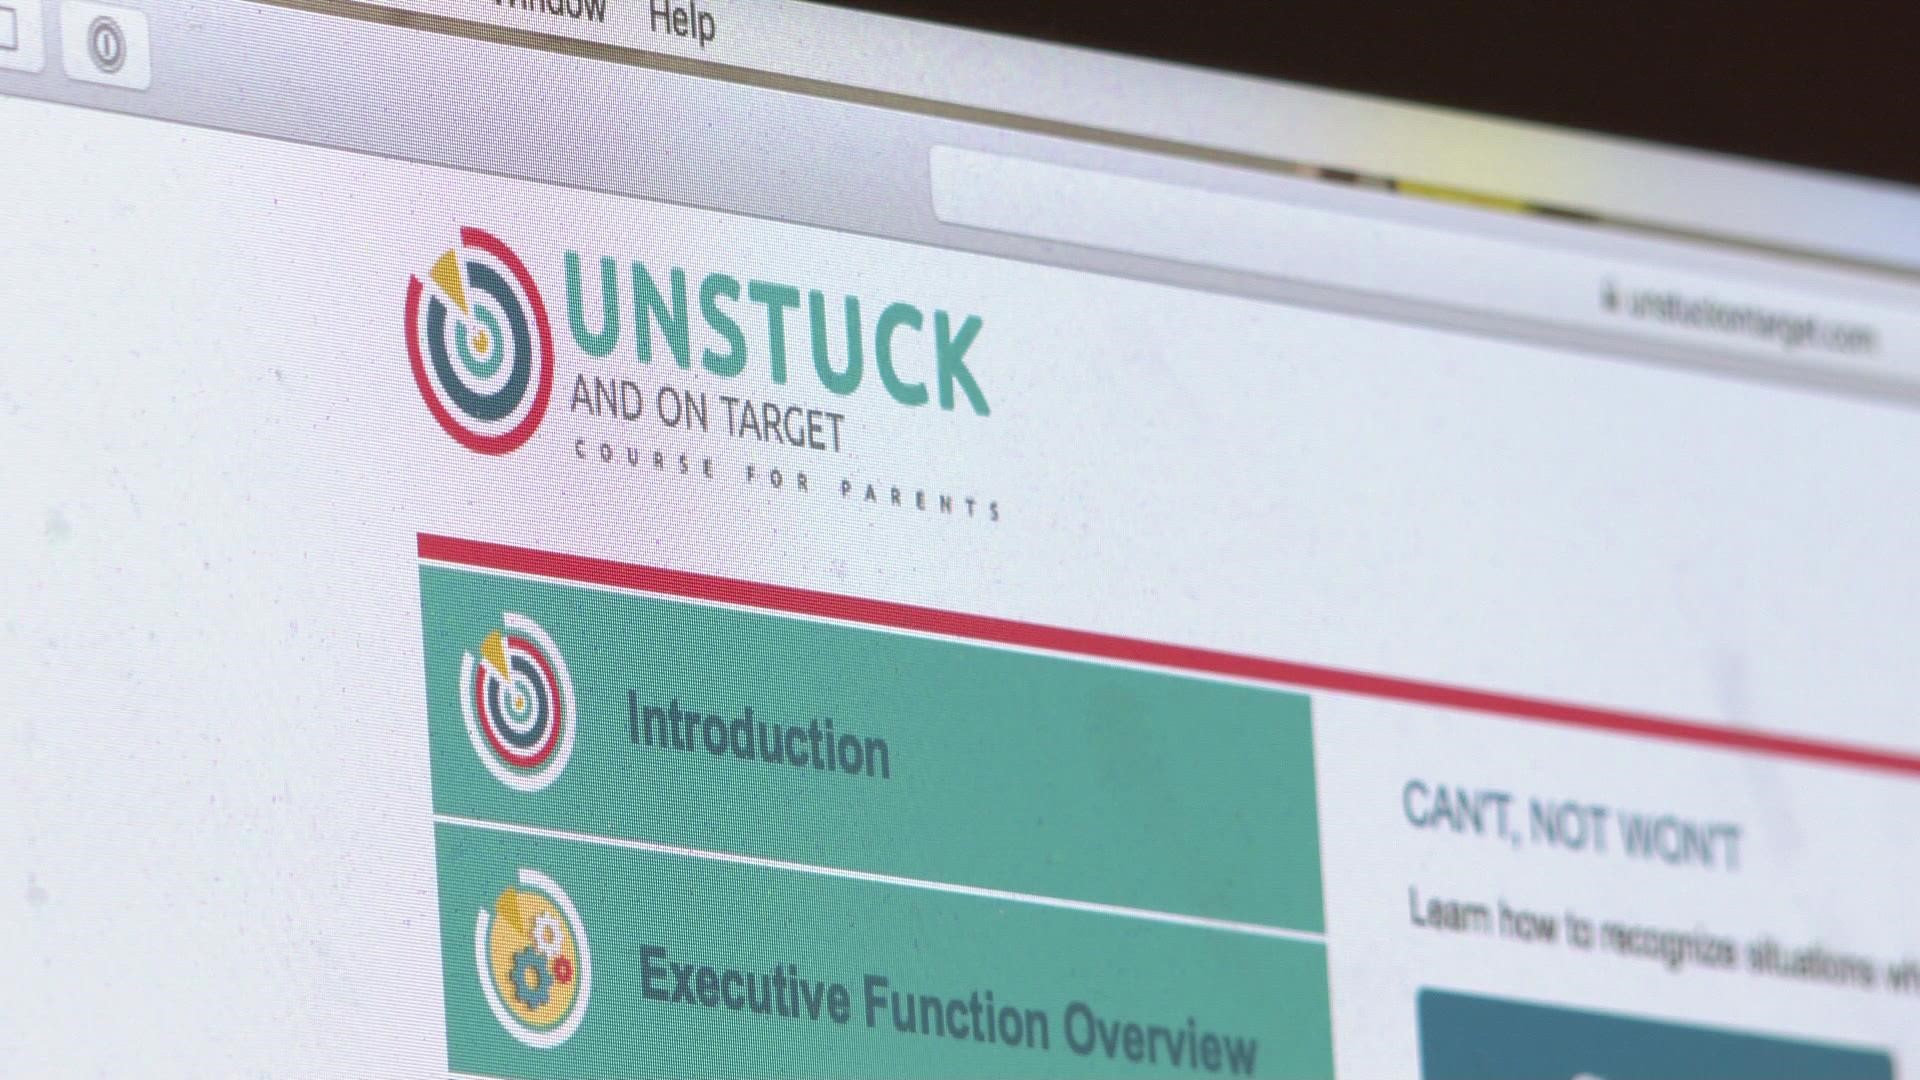 Unstuck and On Target helps elementary school-aged children with ADHD and autism. Here's 9NEWS reporter Courtney Yuen.